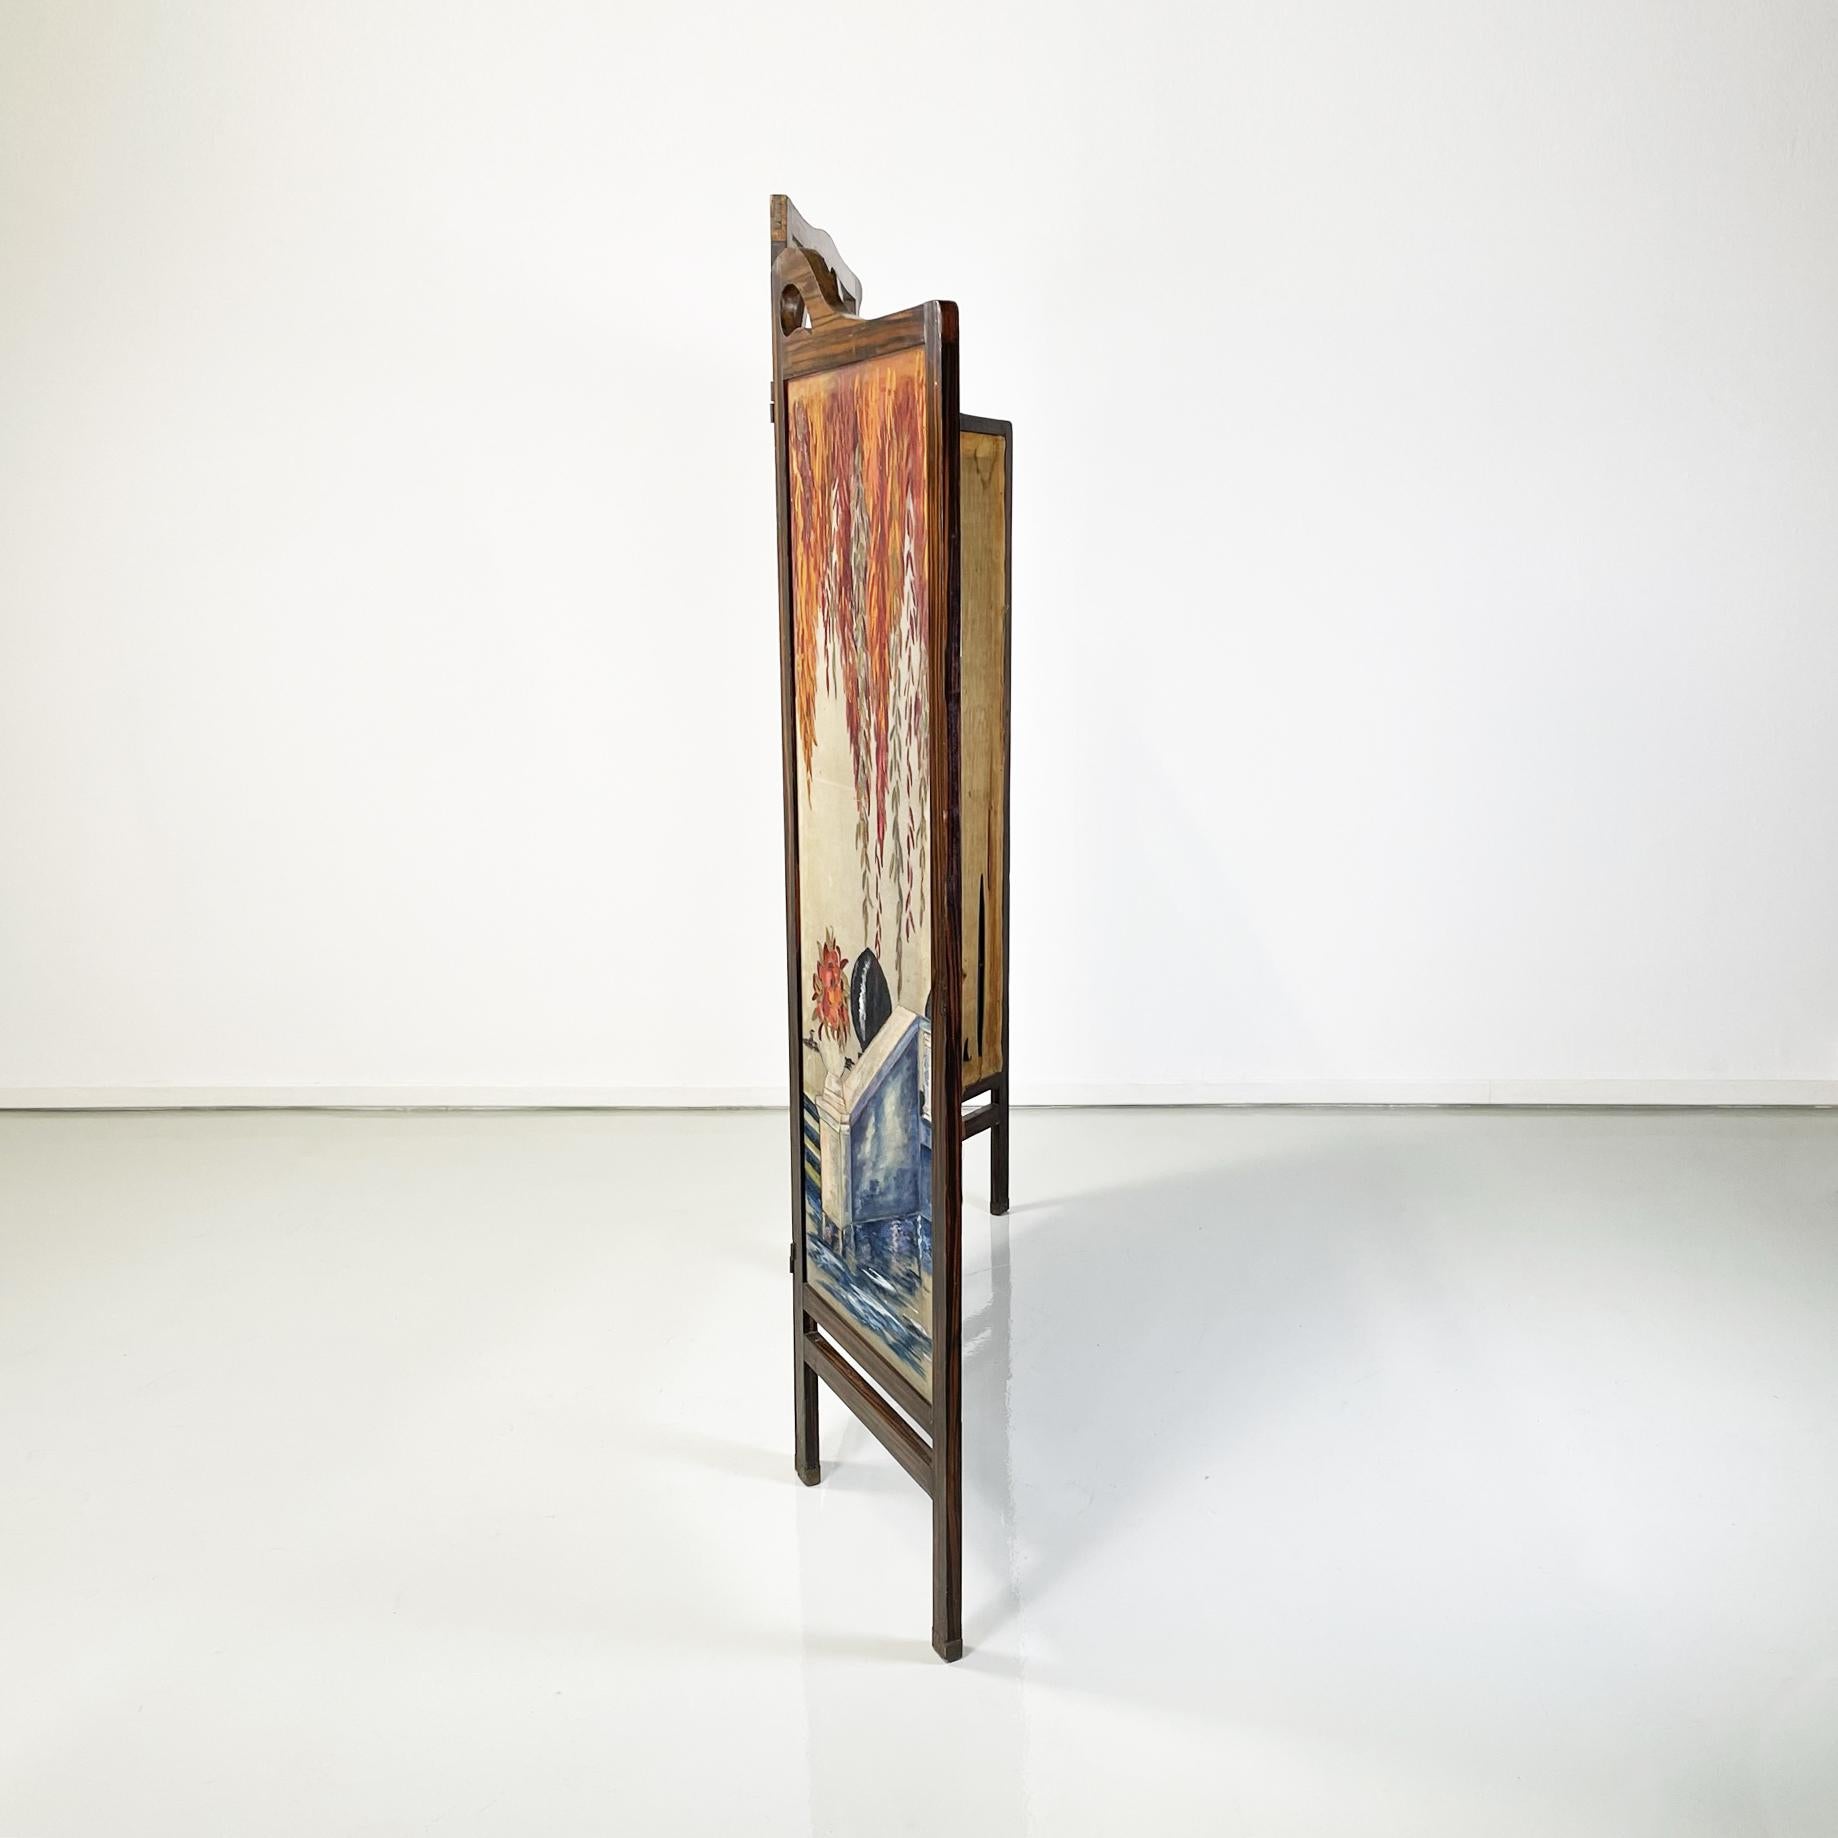 Italian antique Three-door screen hand painted on fabric and wood, early 1900s
Three-door screen with wooden structure and fabric interior, hand painted on one side. The painted subjects represent two women at the shore of a lake with swans. The two